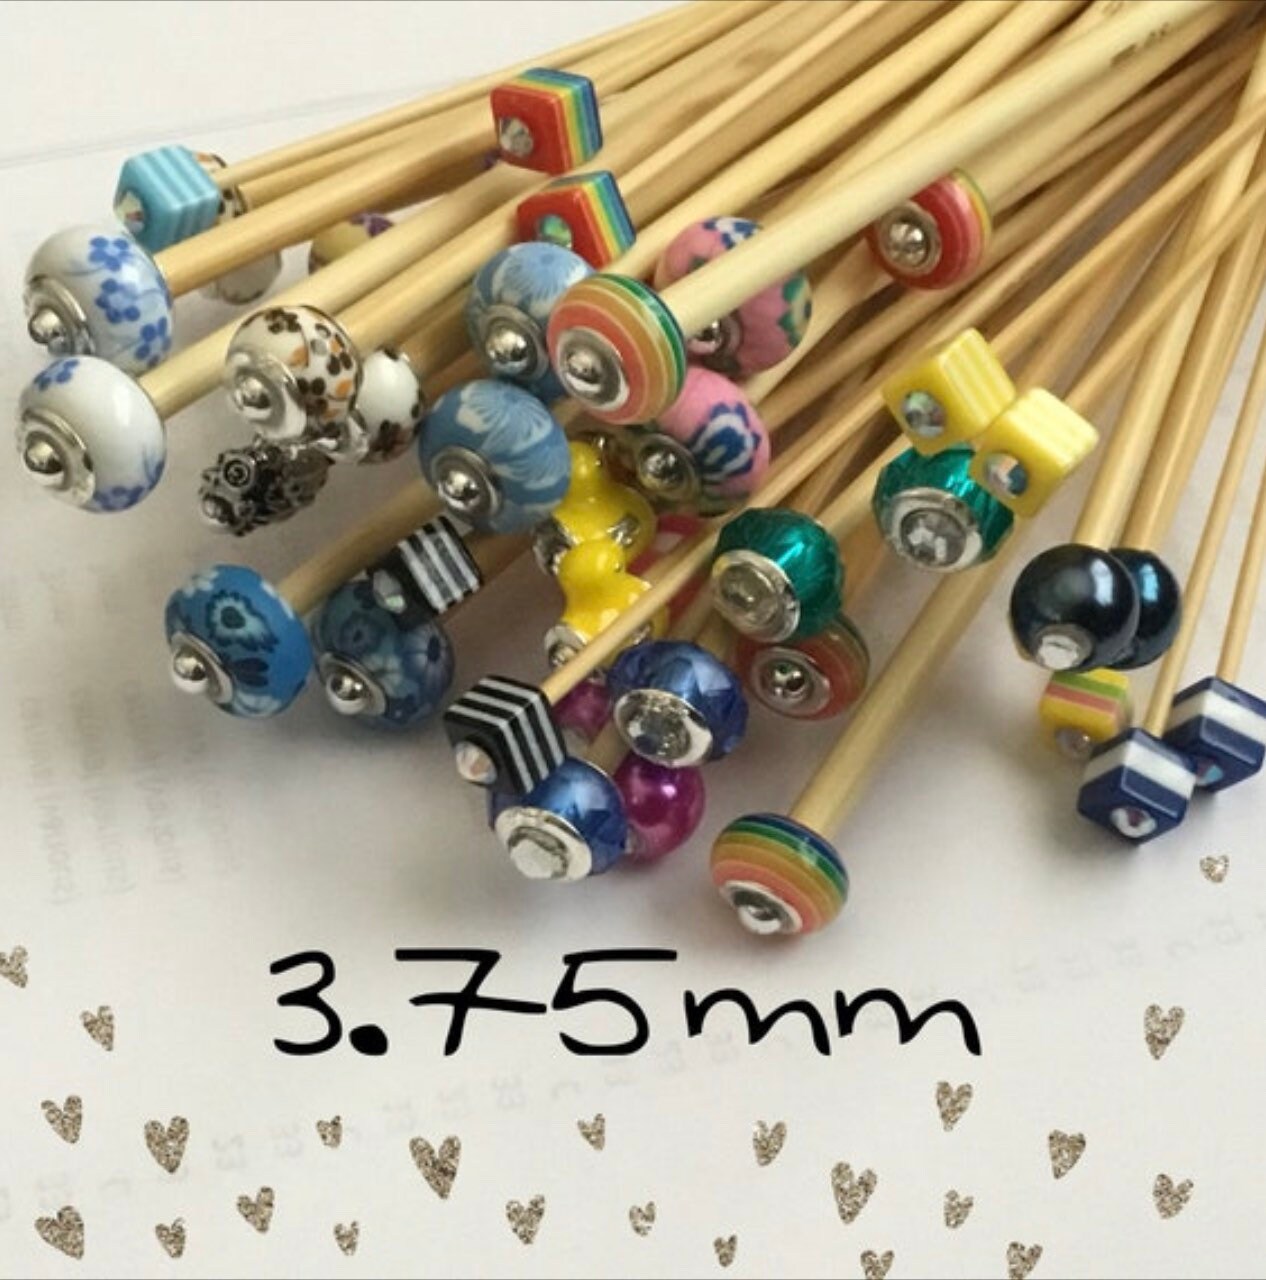 Big Eye Beading Needles Two Sizes 2.25 & 4.5 Fine or Standard Size's Packed  4 Needles per Package Diybeads 